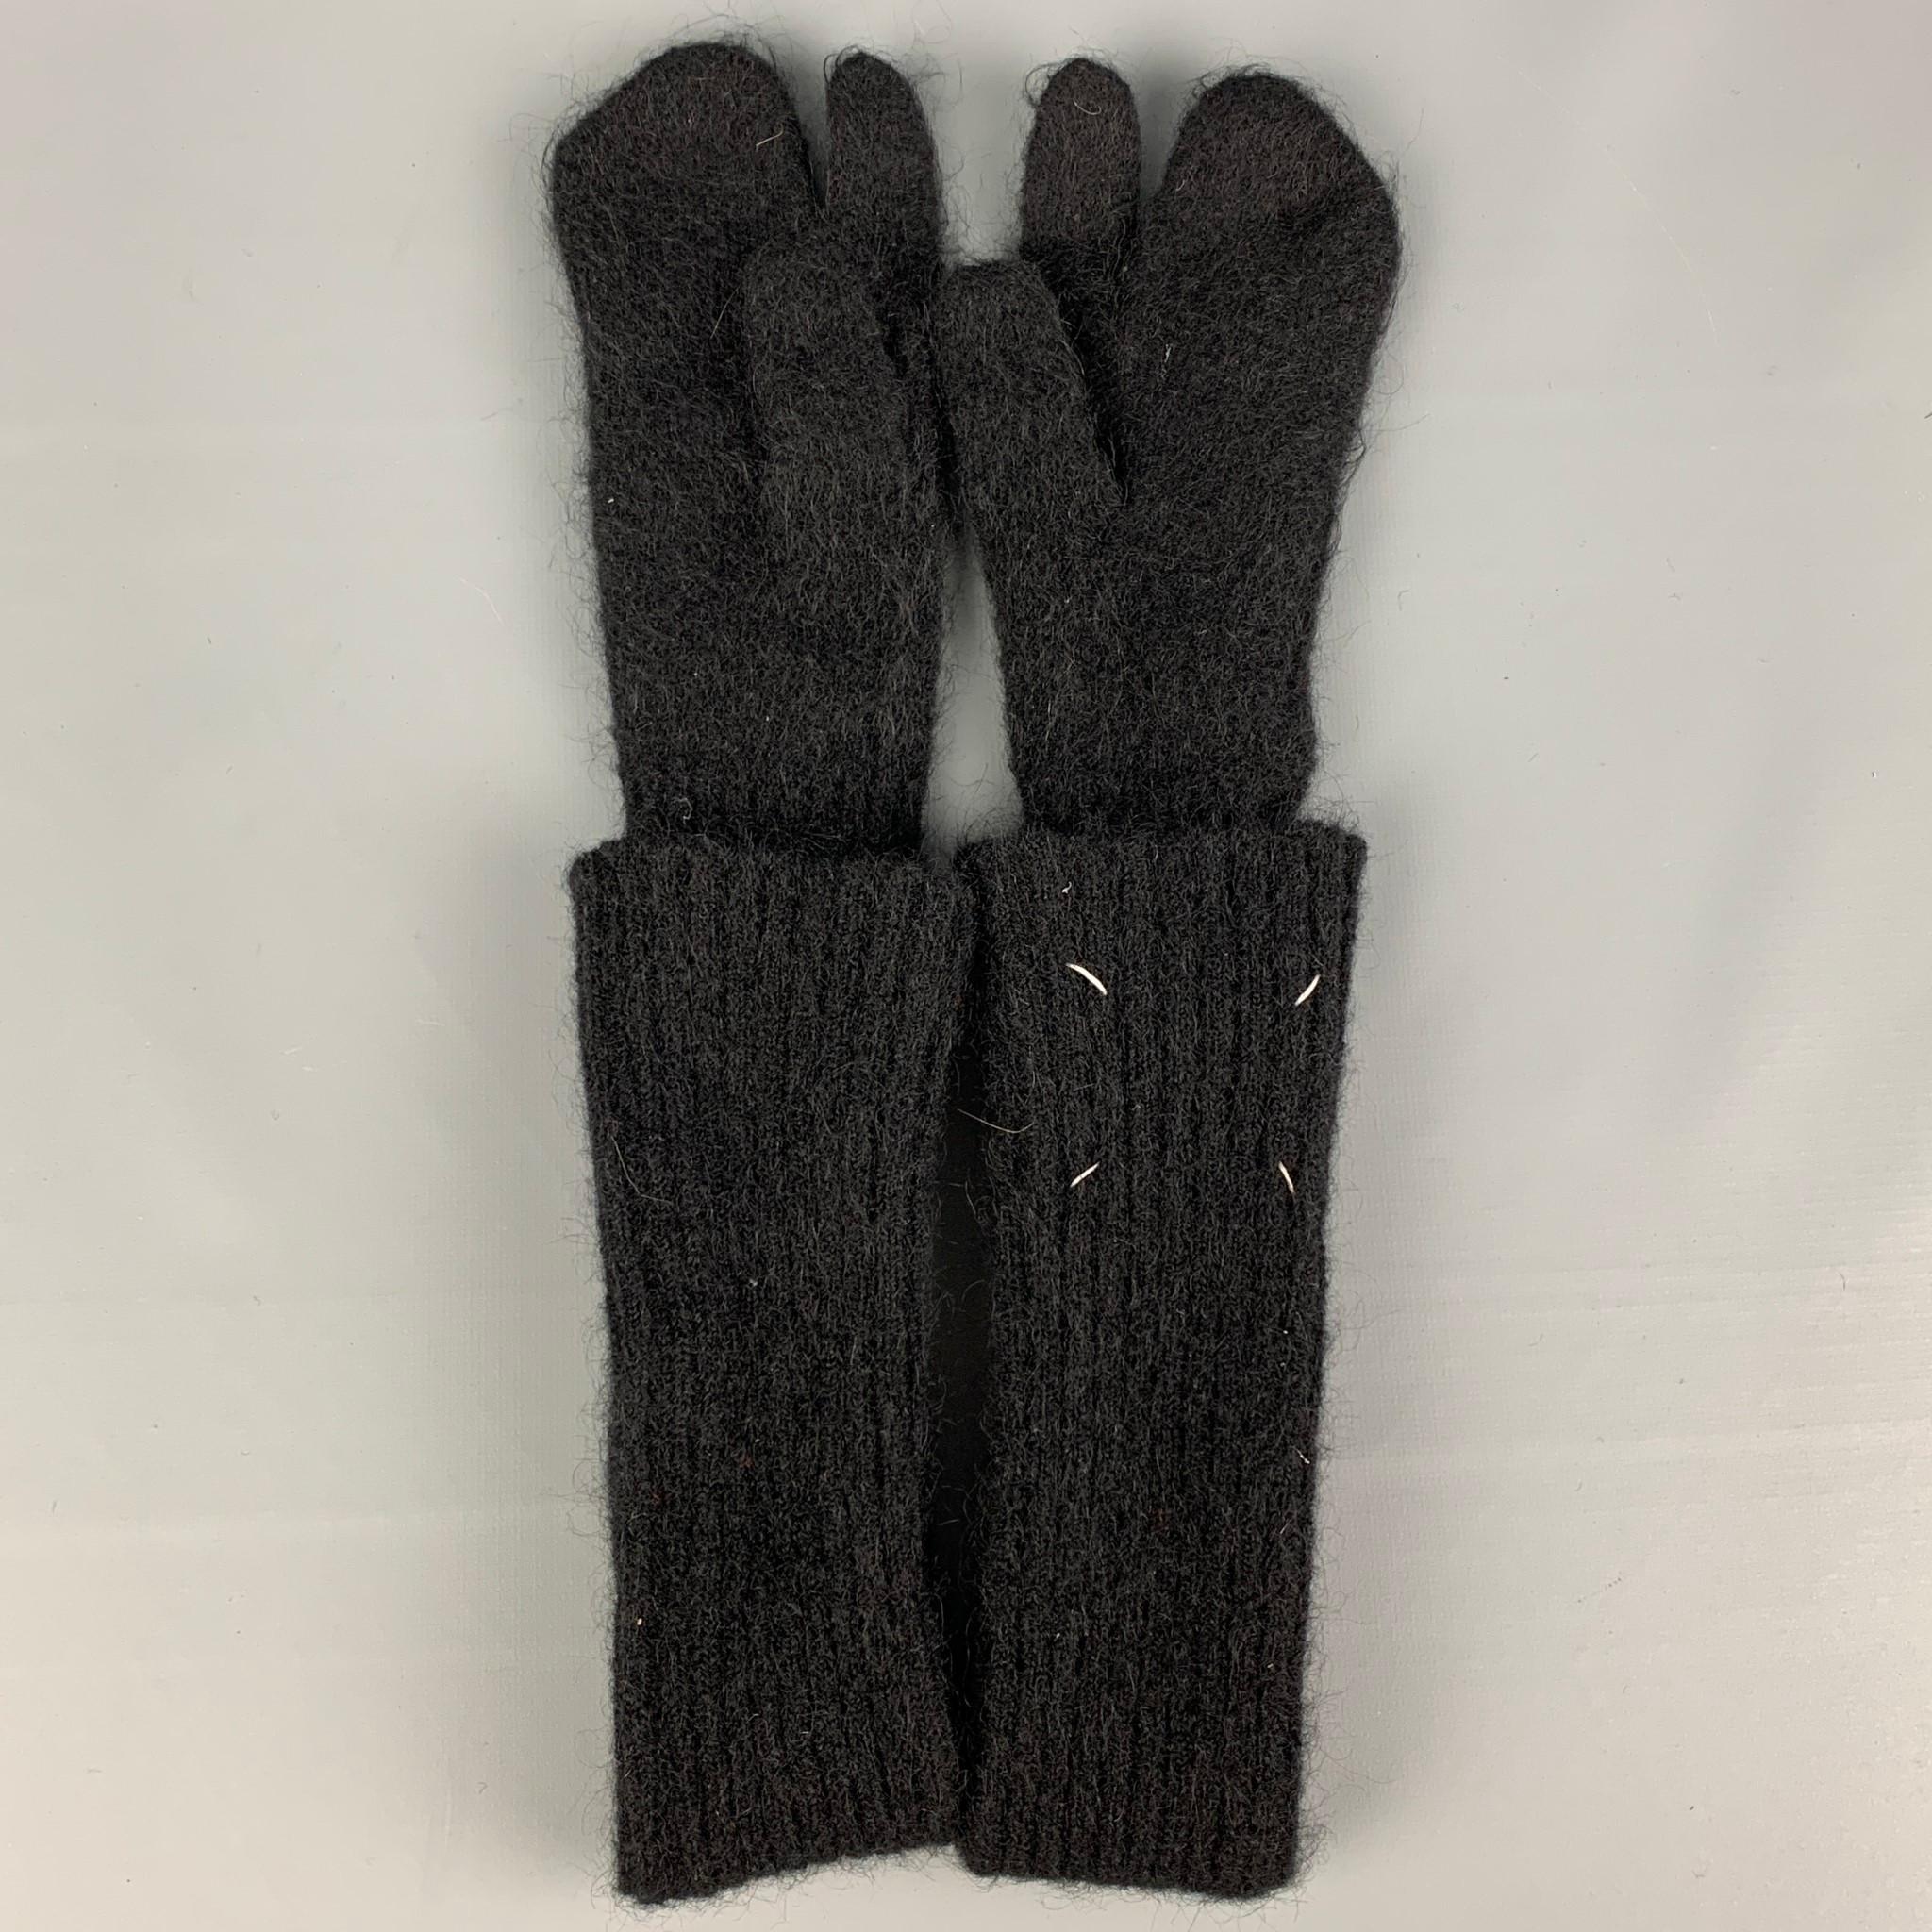 MM6 MAISON MARGIELA 'Tabi' gloves comes in a black stretch knitted wool blend featuring a long length.

Very Good Pre-Owned Condition.

Marked: Size tag removed

Measurements:

Width: 3.25 in.
Length: 23 in. 